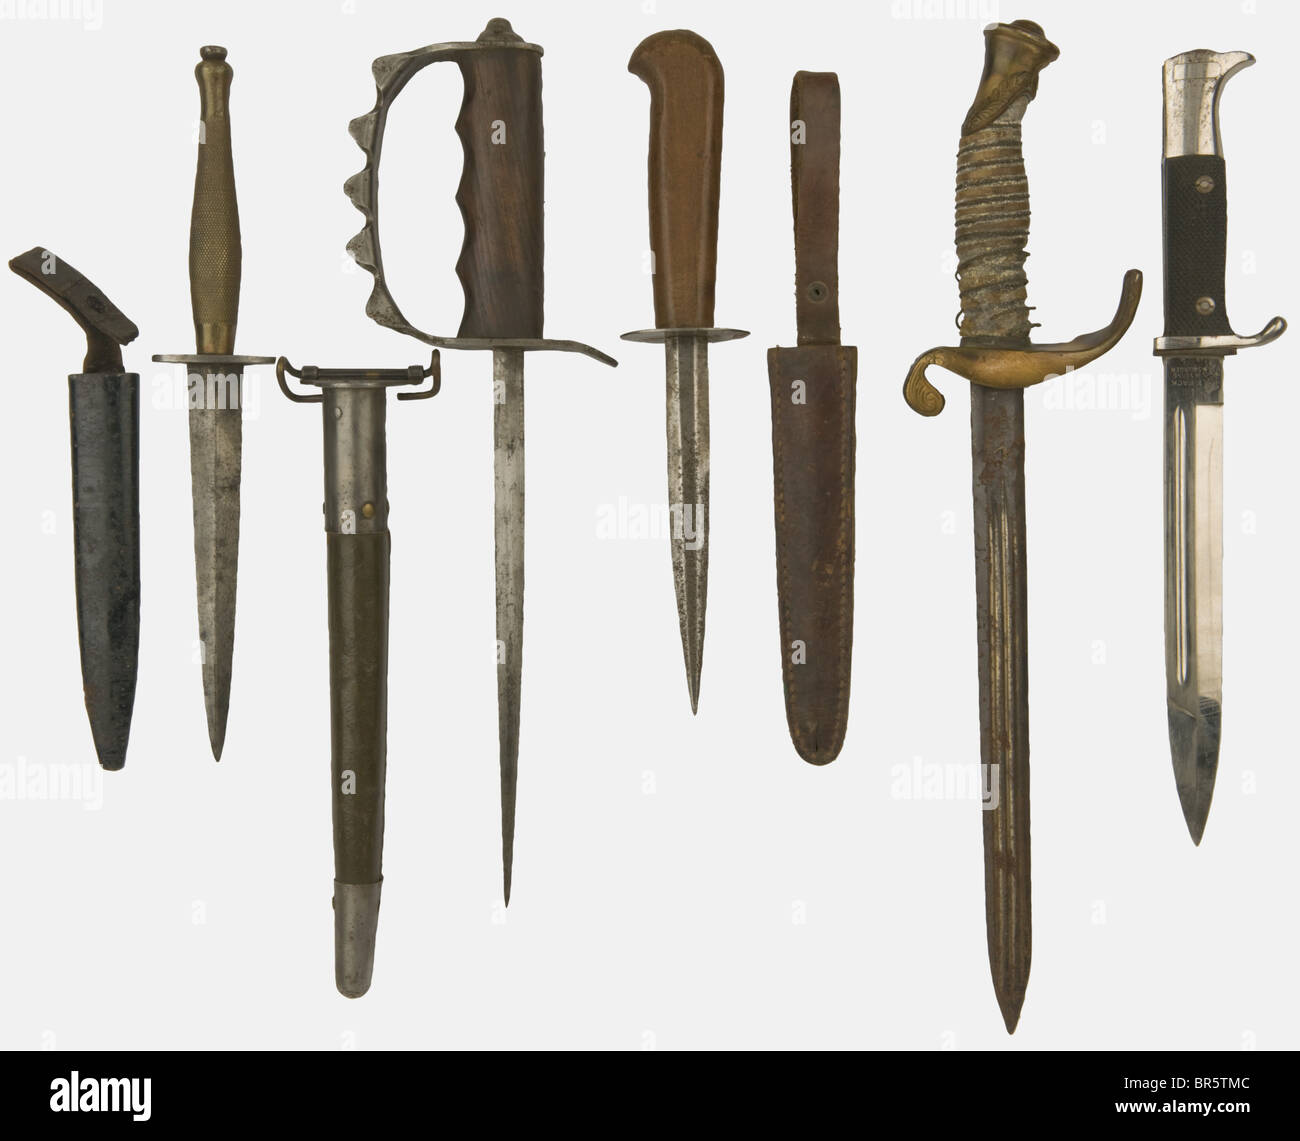 A group of edged weapons, including an English commando dagger 'Fairbank & Sikes' with cast bronze handle (chequered), 'broad arrow' stamping, 16 cm long blade, no scabbard, a walking-out German WW II nickel-plated bayonet with chequered black plastic grip plates, the blade stamped 'E PACK & SÖHNE SOLINGEN, no scabbard, a French First World War fighting knife with steel crossguard stamped 'GP' in a rectangle, brown leather scabbard, war made, the remains of a German sword with shortened blade stamped 'Solingen' and lizard skin grip, crossguard broken, a US figh, Stock Photo